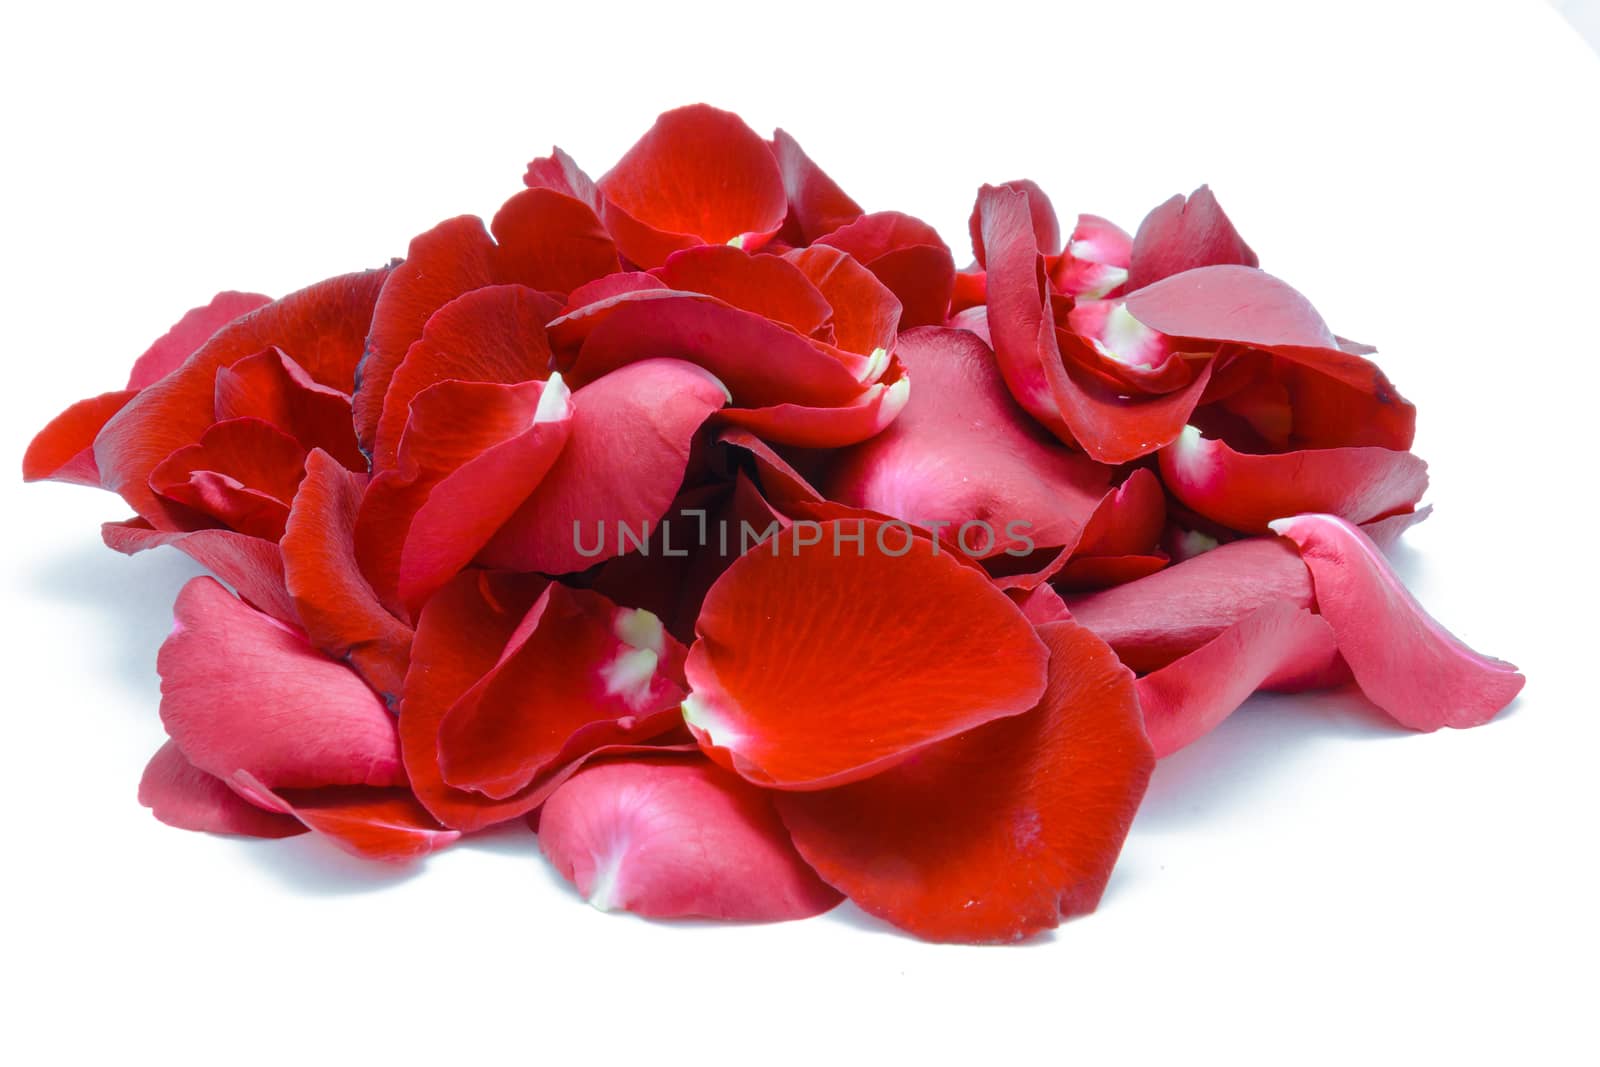 Red rose petal on white background by chingraph